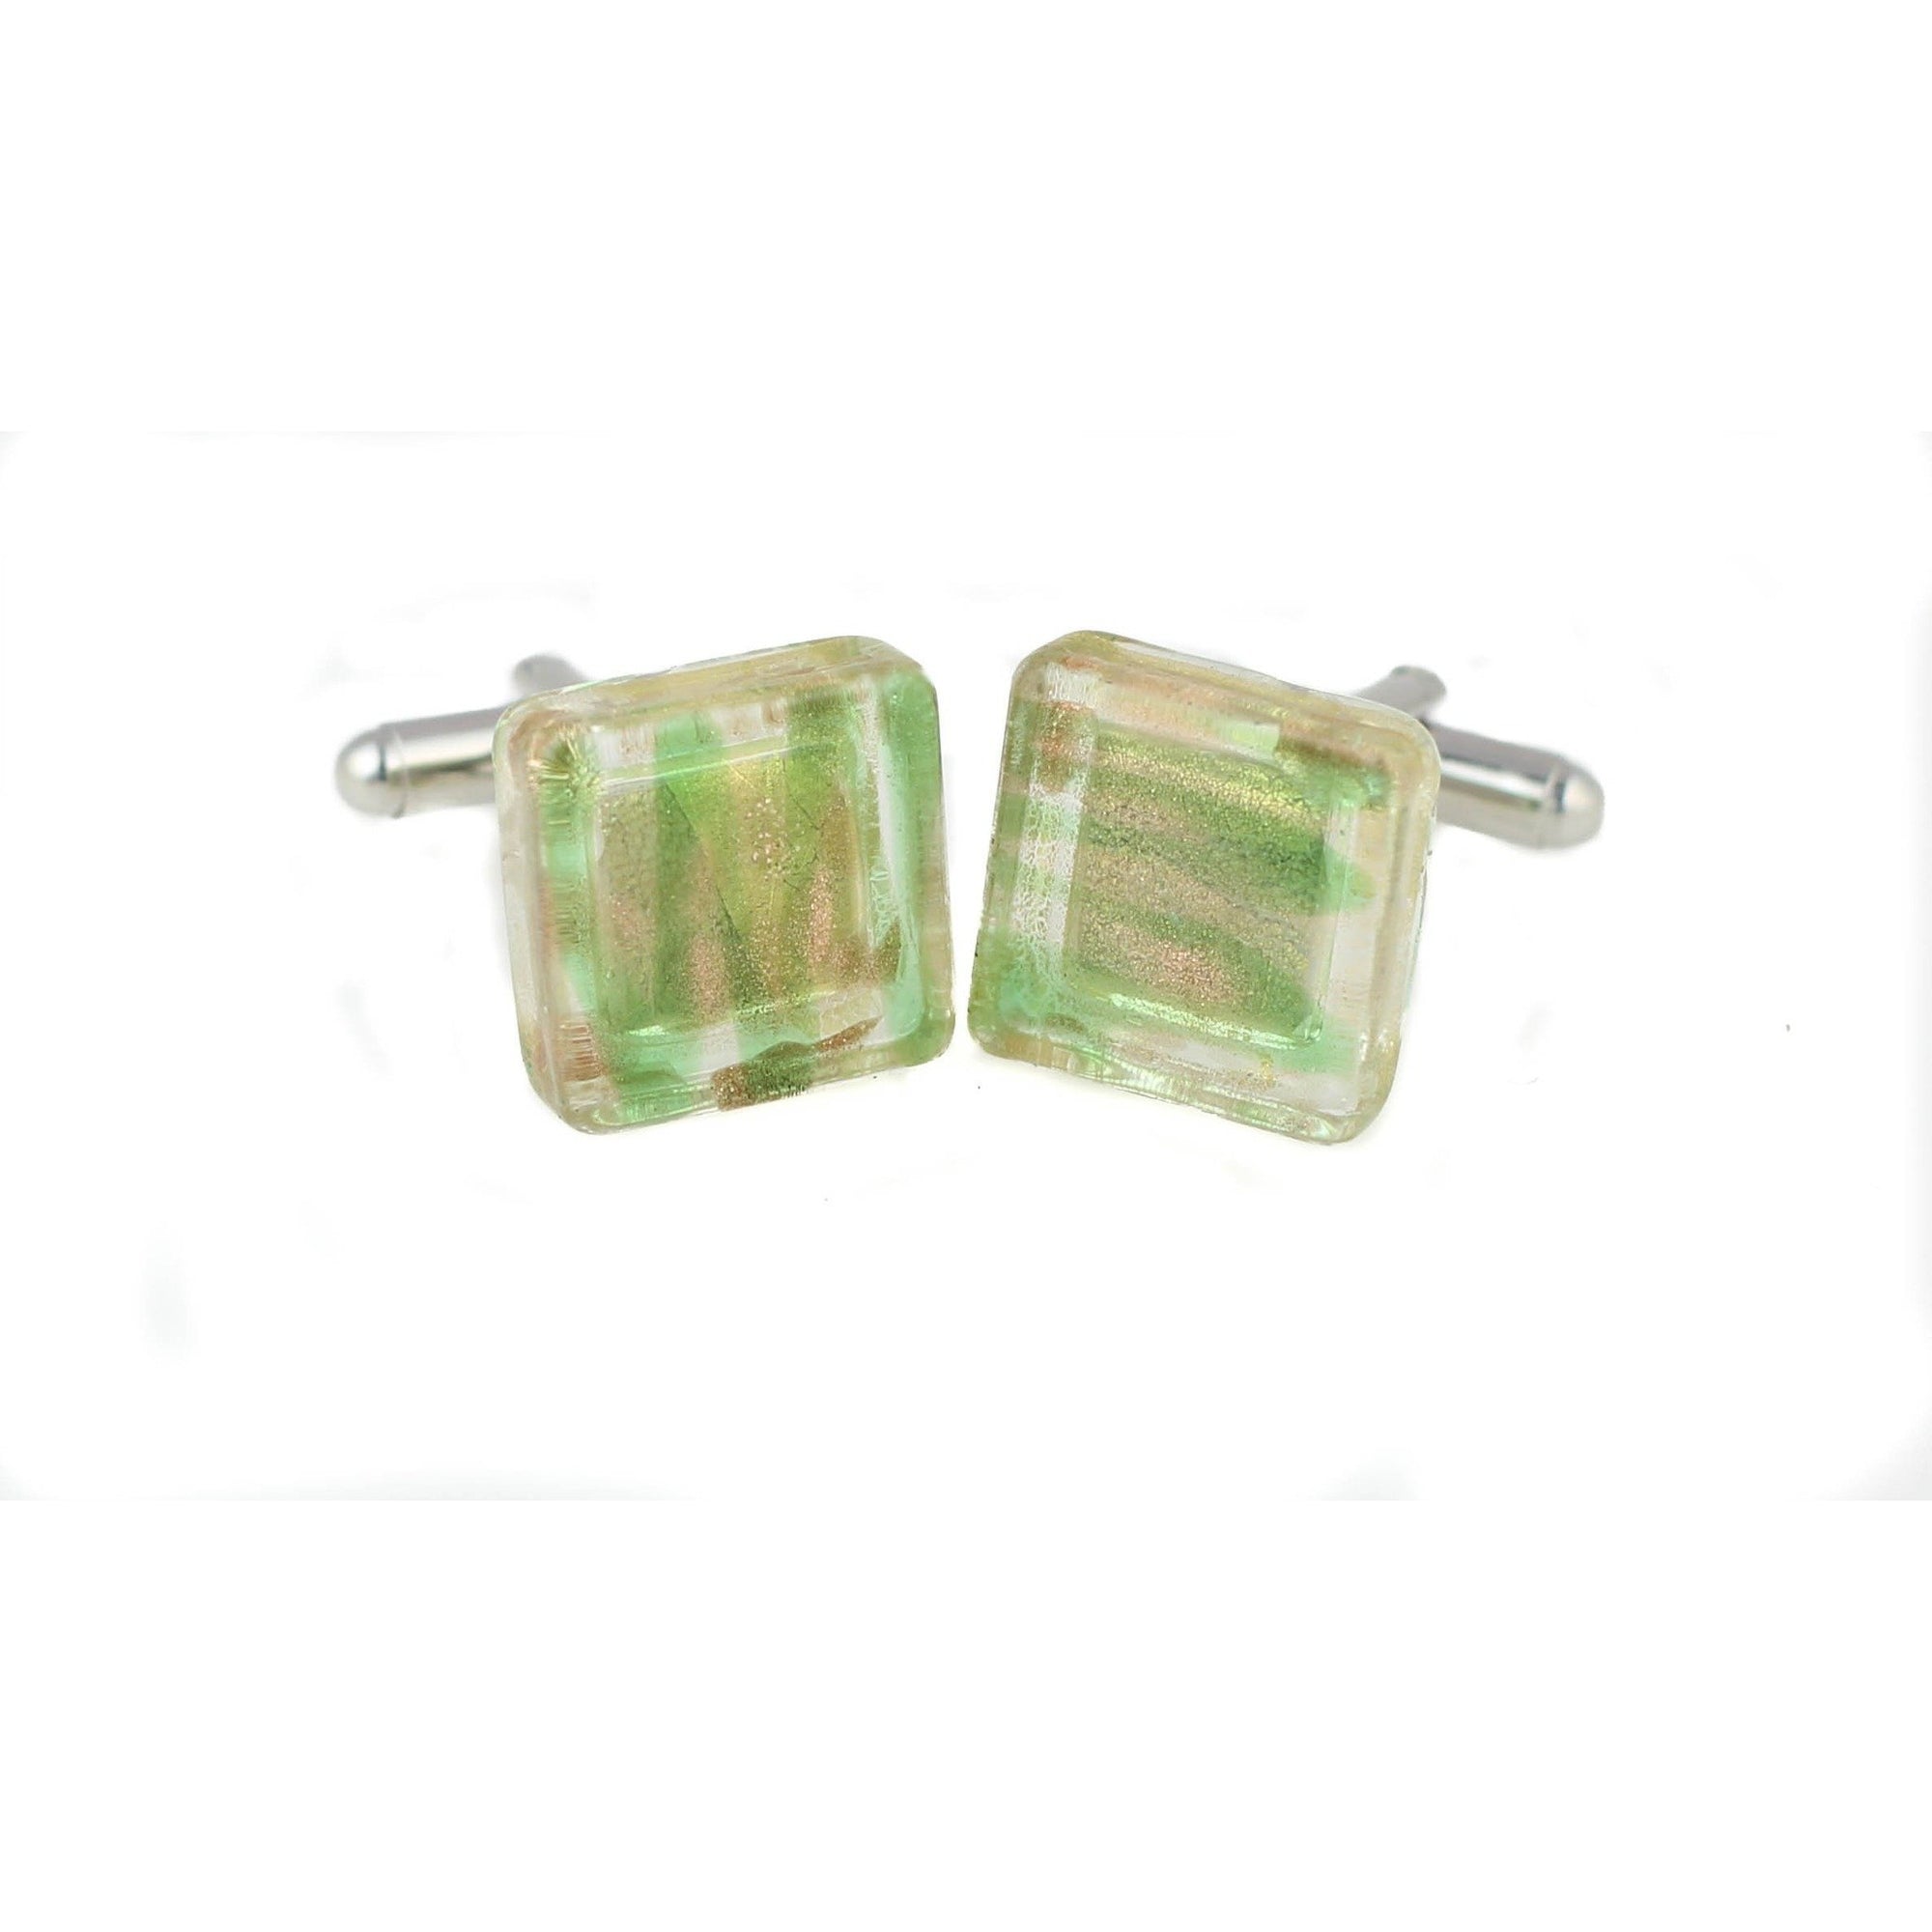 Yellow and Green Patterned Glass Cufflinks